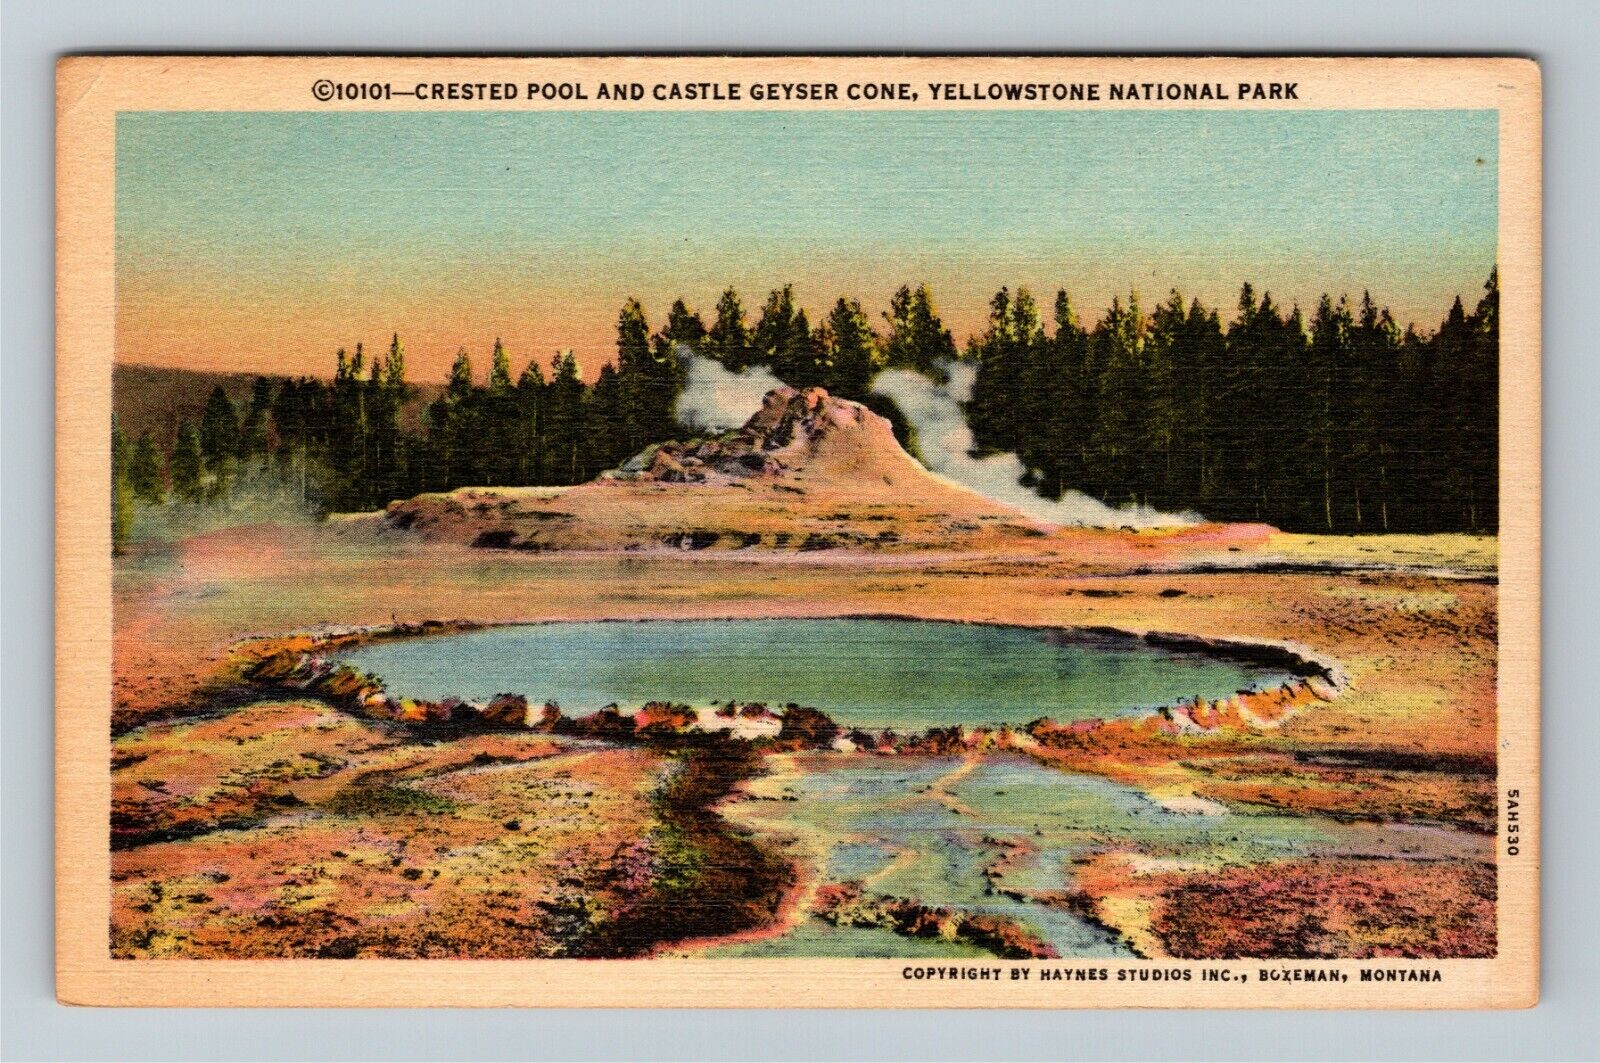 WY-Wyoming, Yellowstone National Park, Castle Geyser Cone, Pool Vintage Postcard